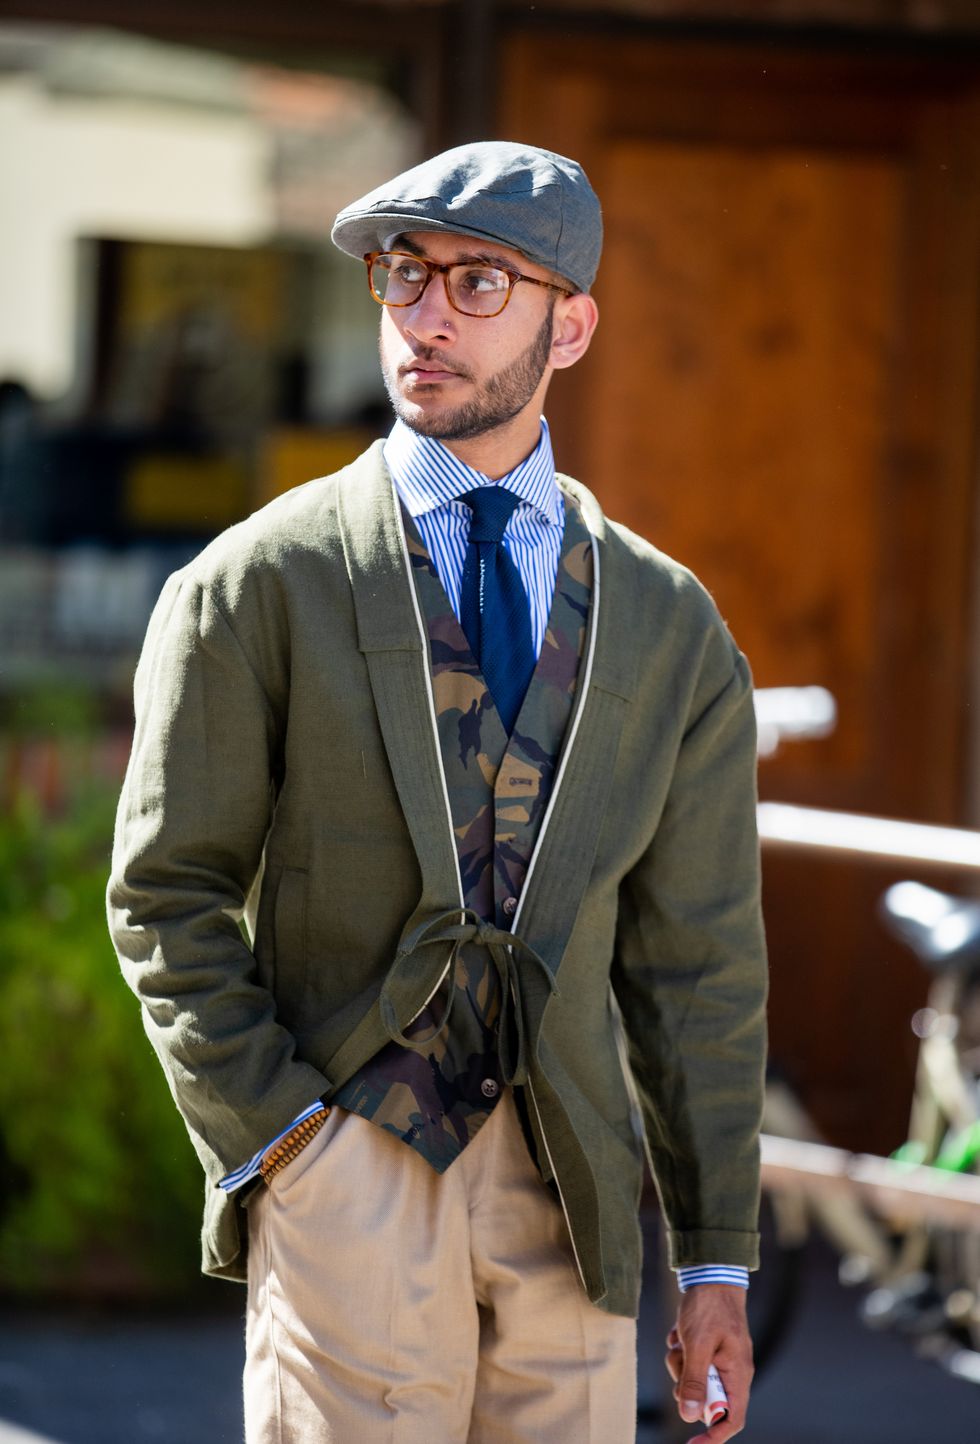 The Best Street Style Looks from Pitti Uomo 96